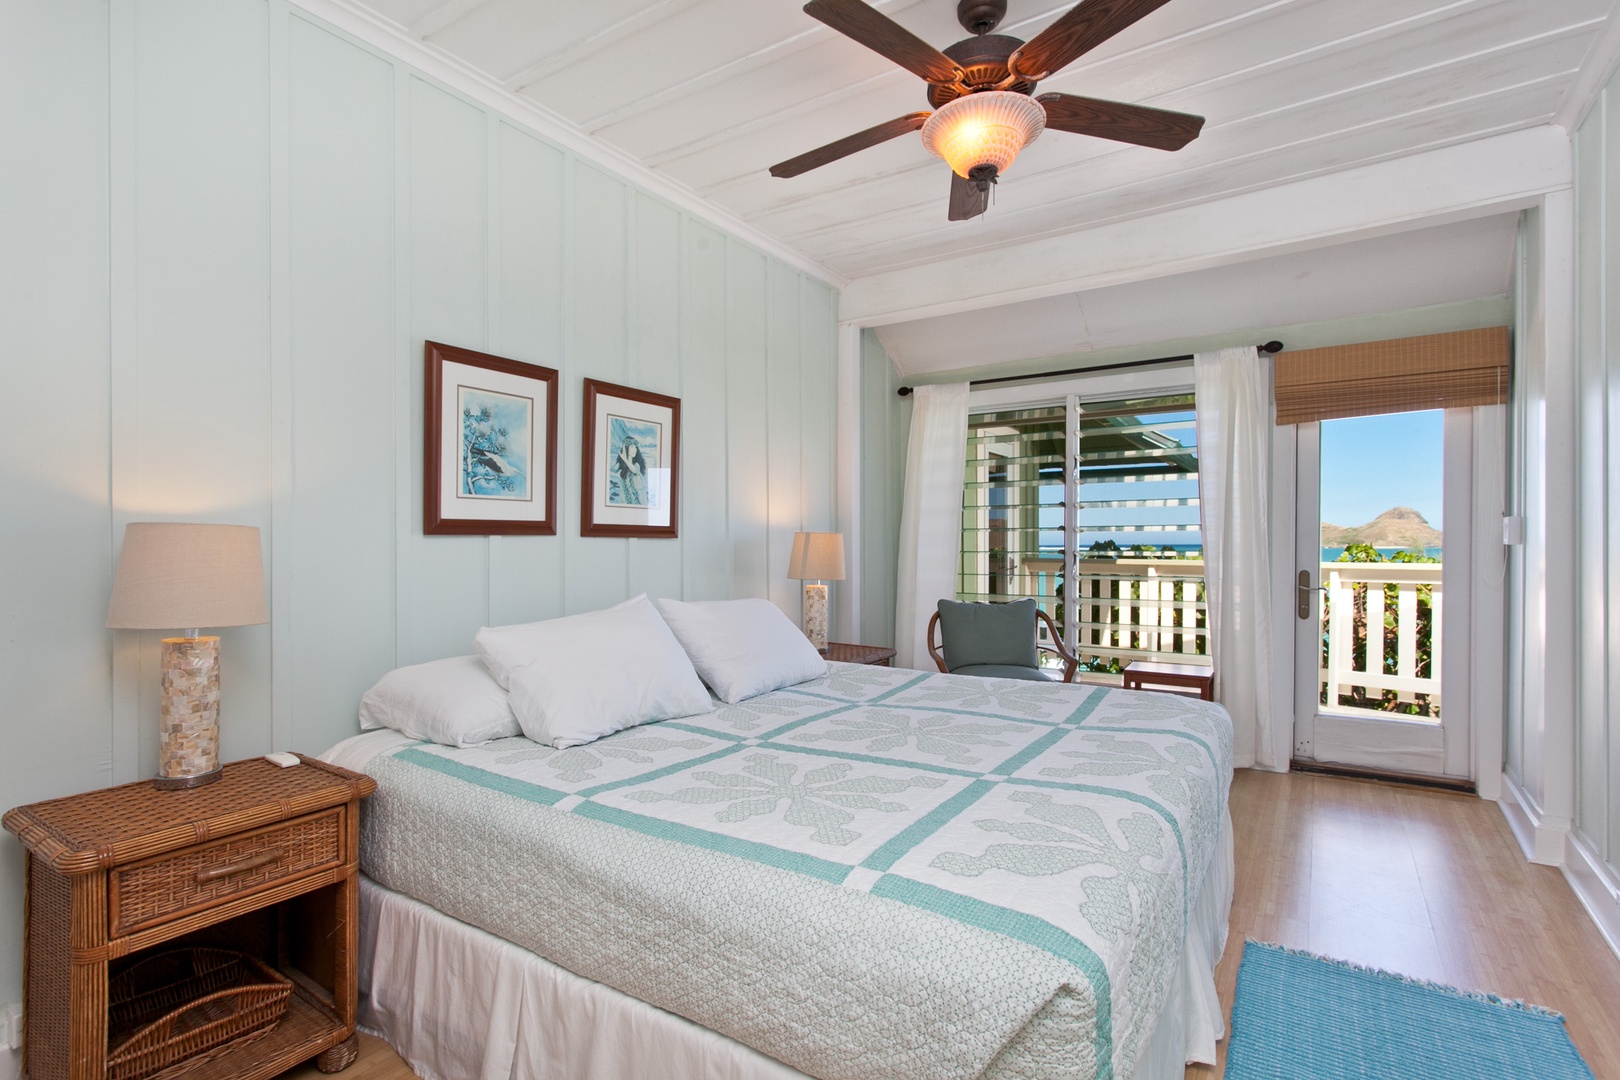 Kailua Vacation Rentals, Hale Kainalu* - The second guest bedroom offers a king bed, and futon for additional guests, plus access to lanai.